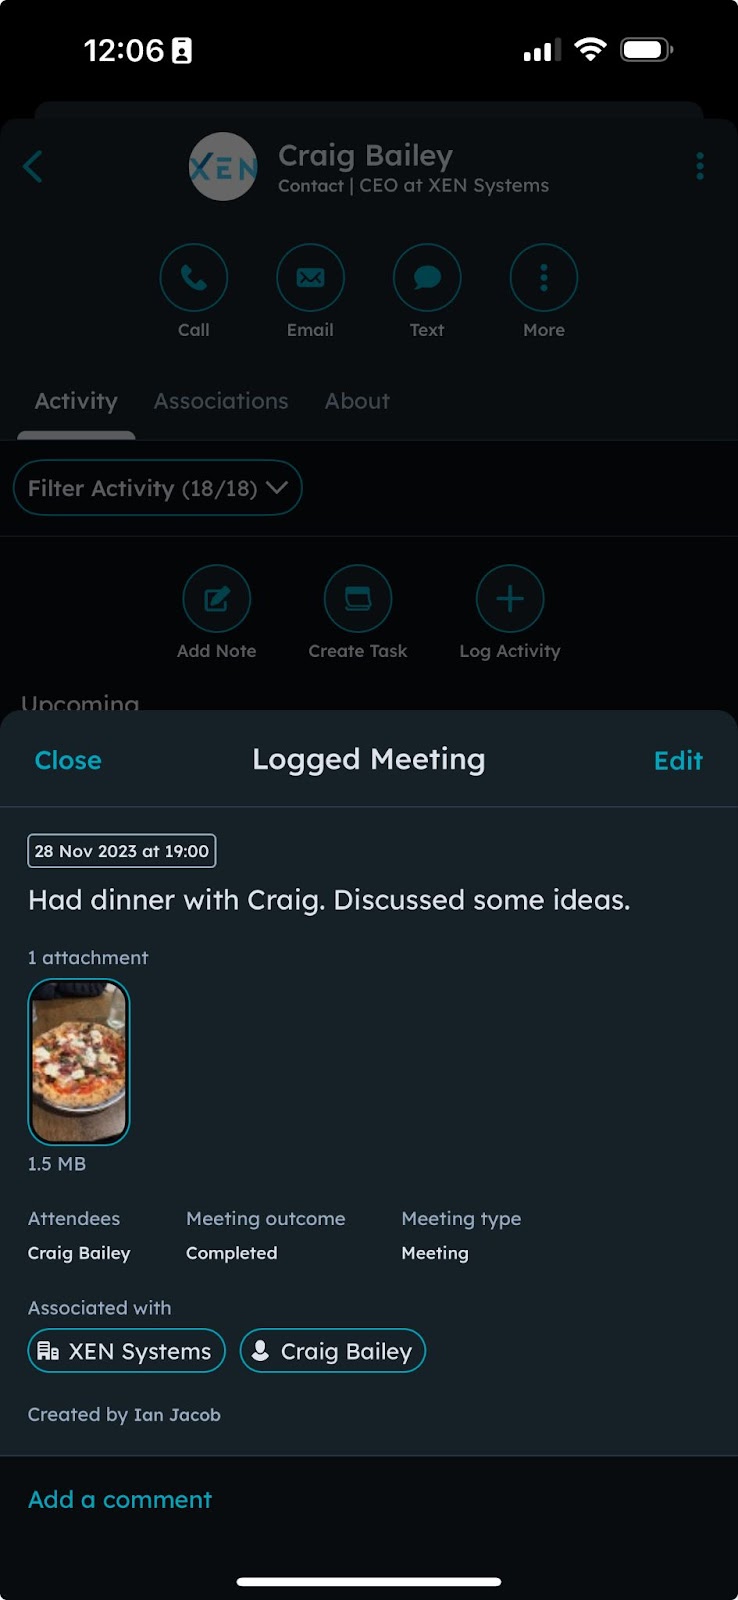 You can now add images easily to meetings, calls etc on the HubSpot app!